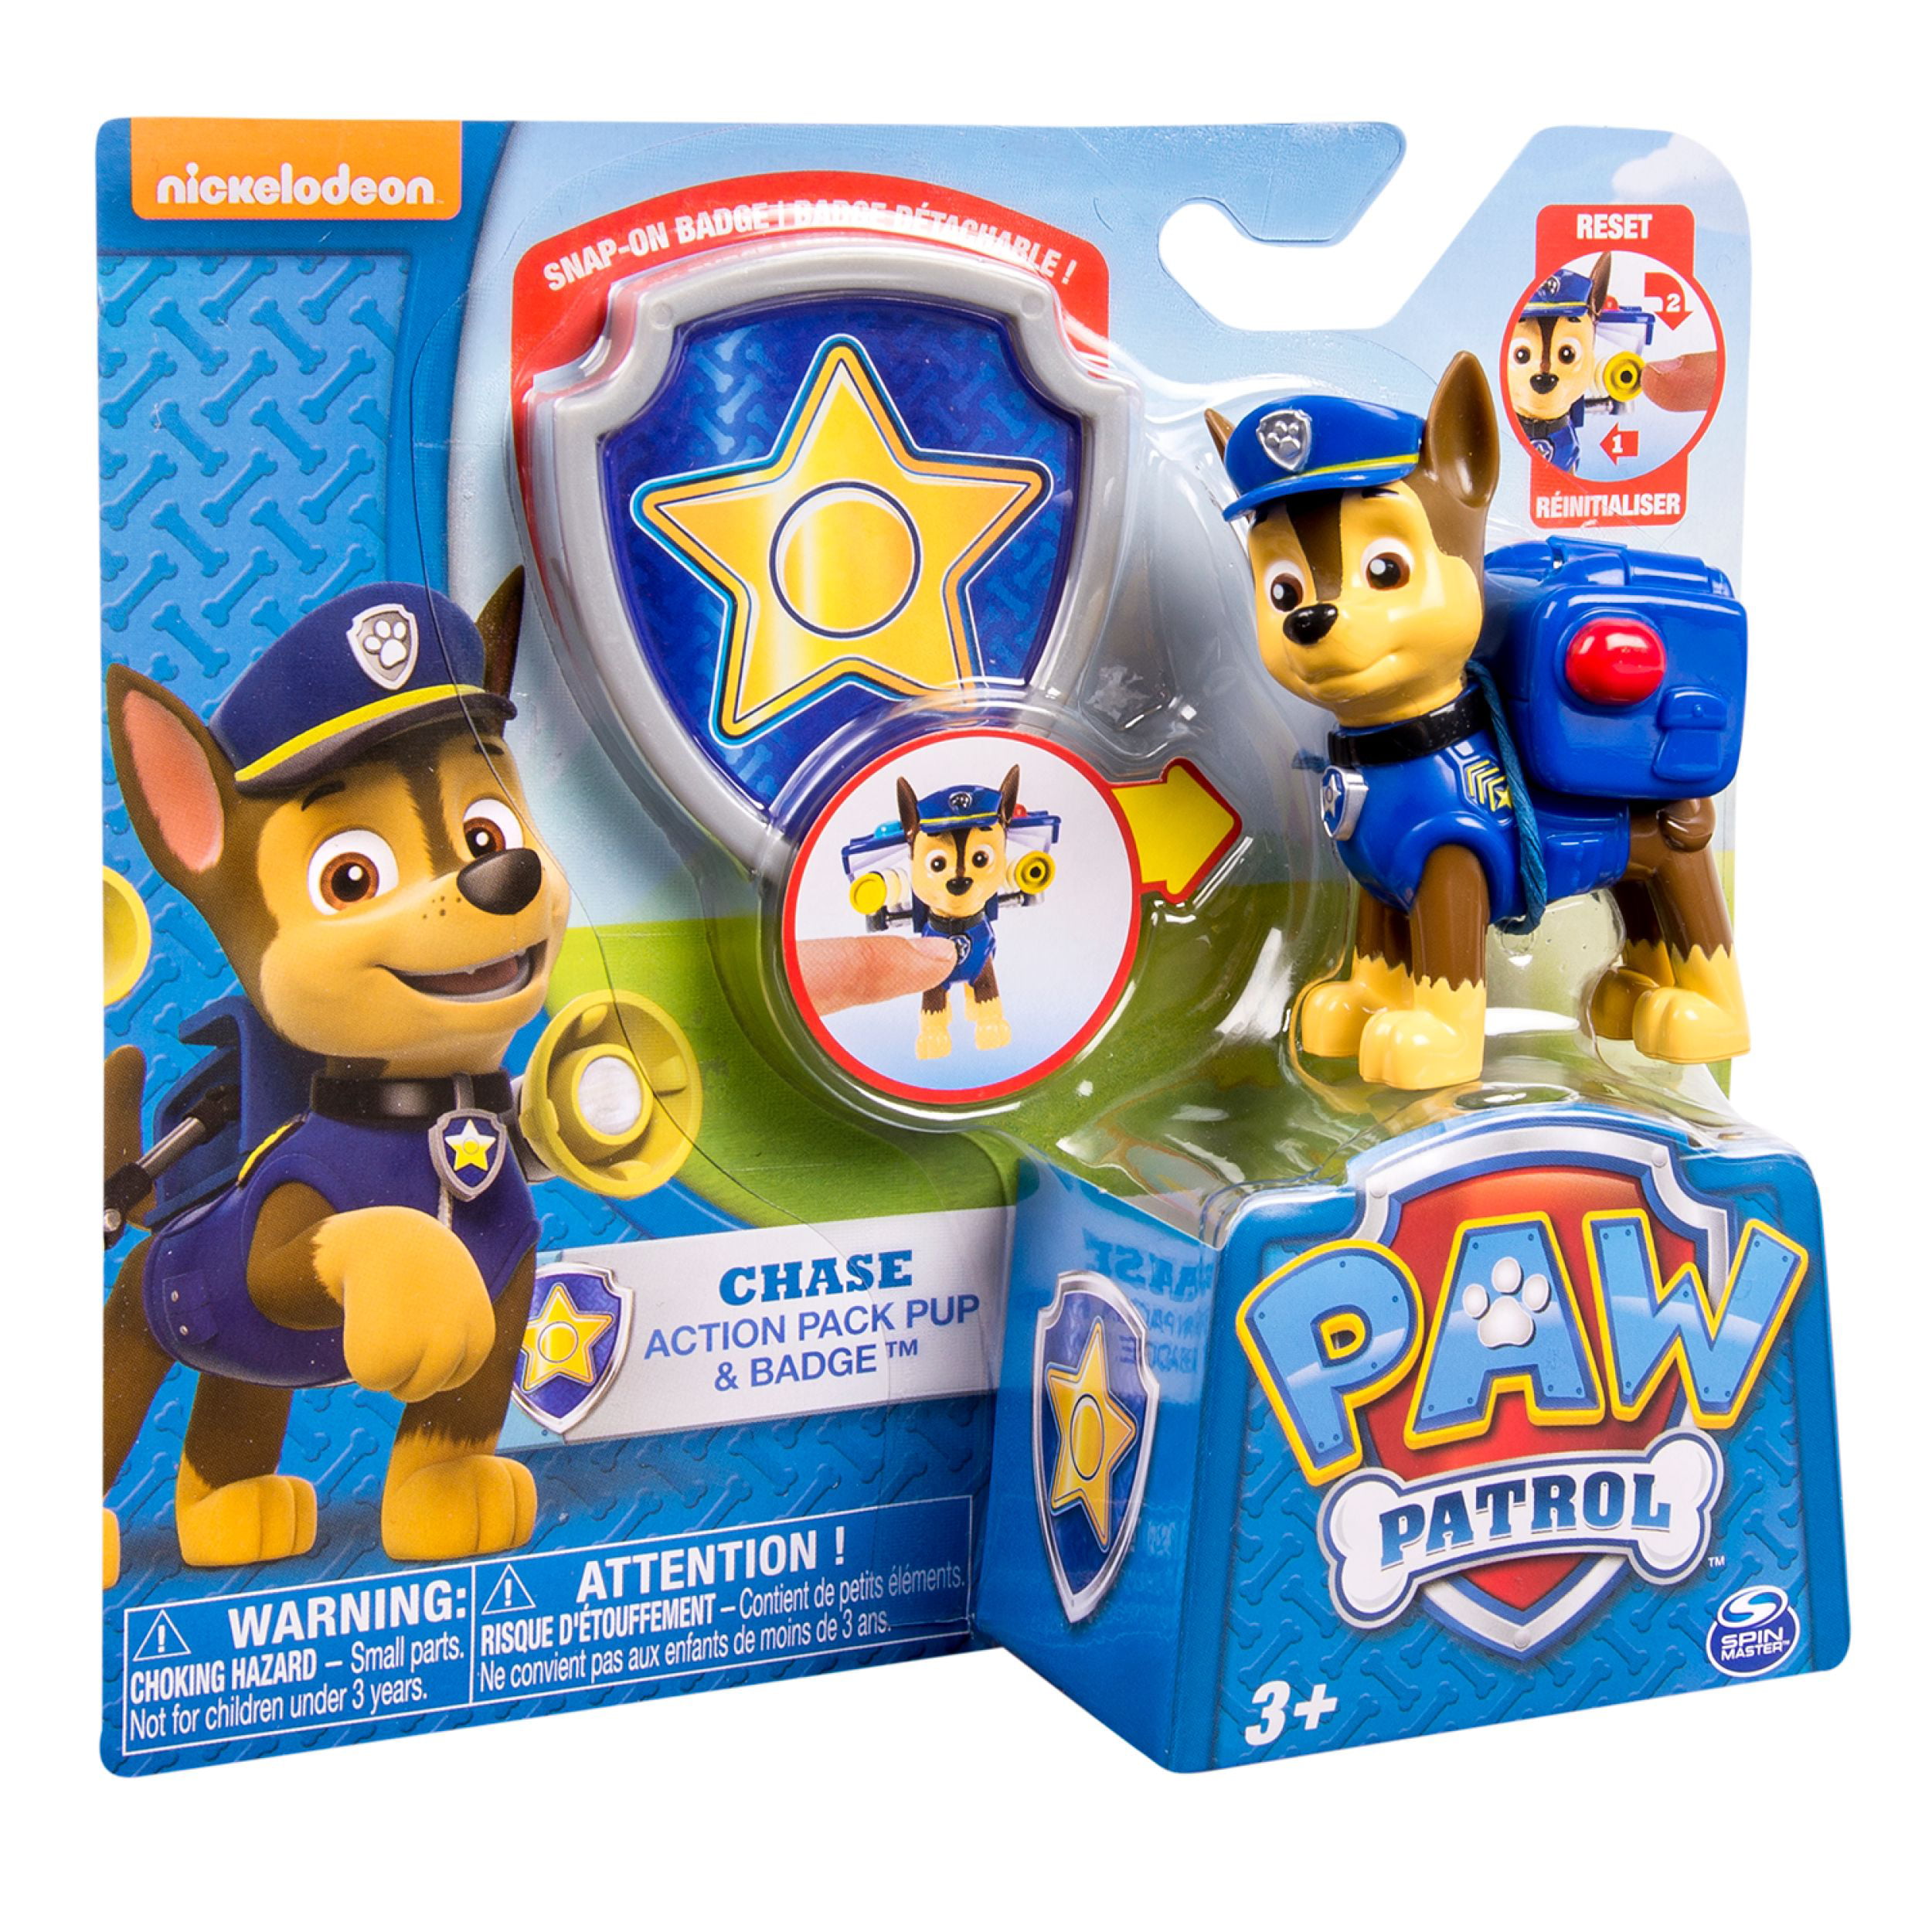 Action Pack Pup & Badge Nickelodeon Paw Patrol Chase 